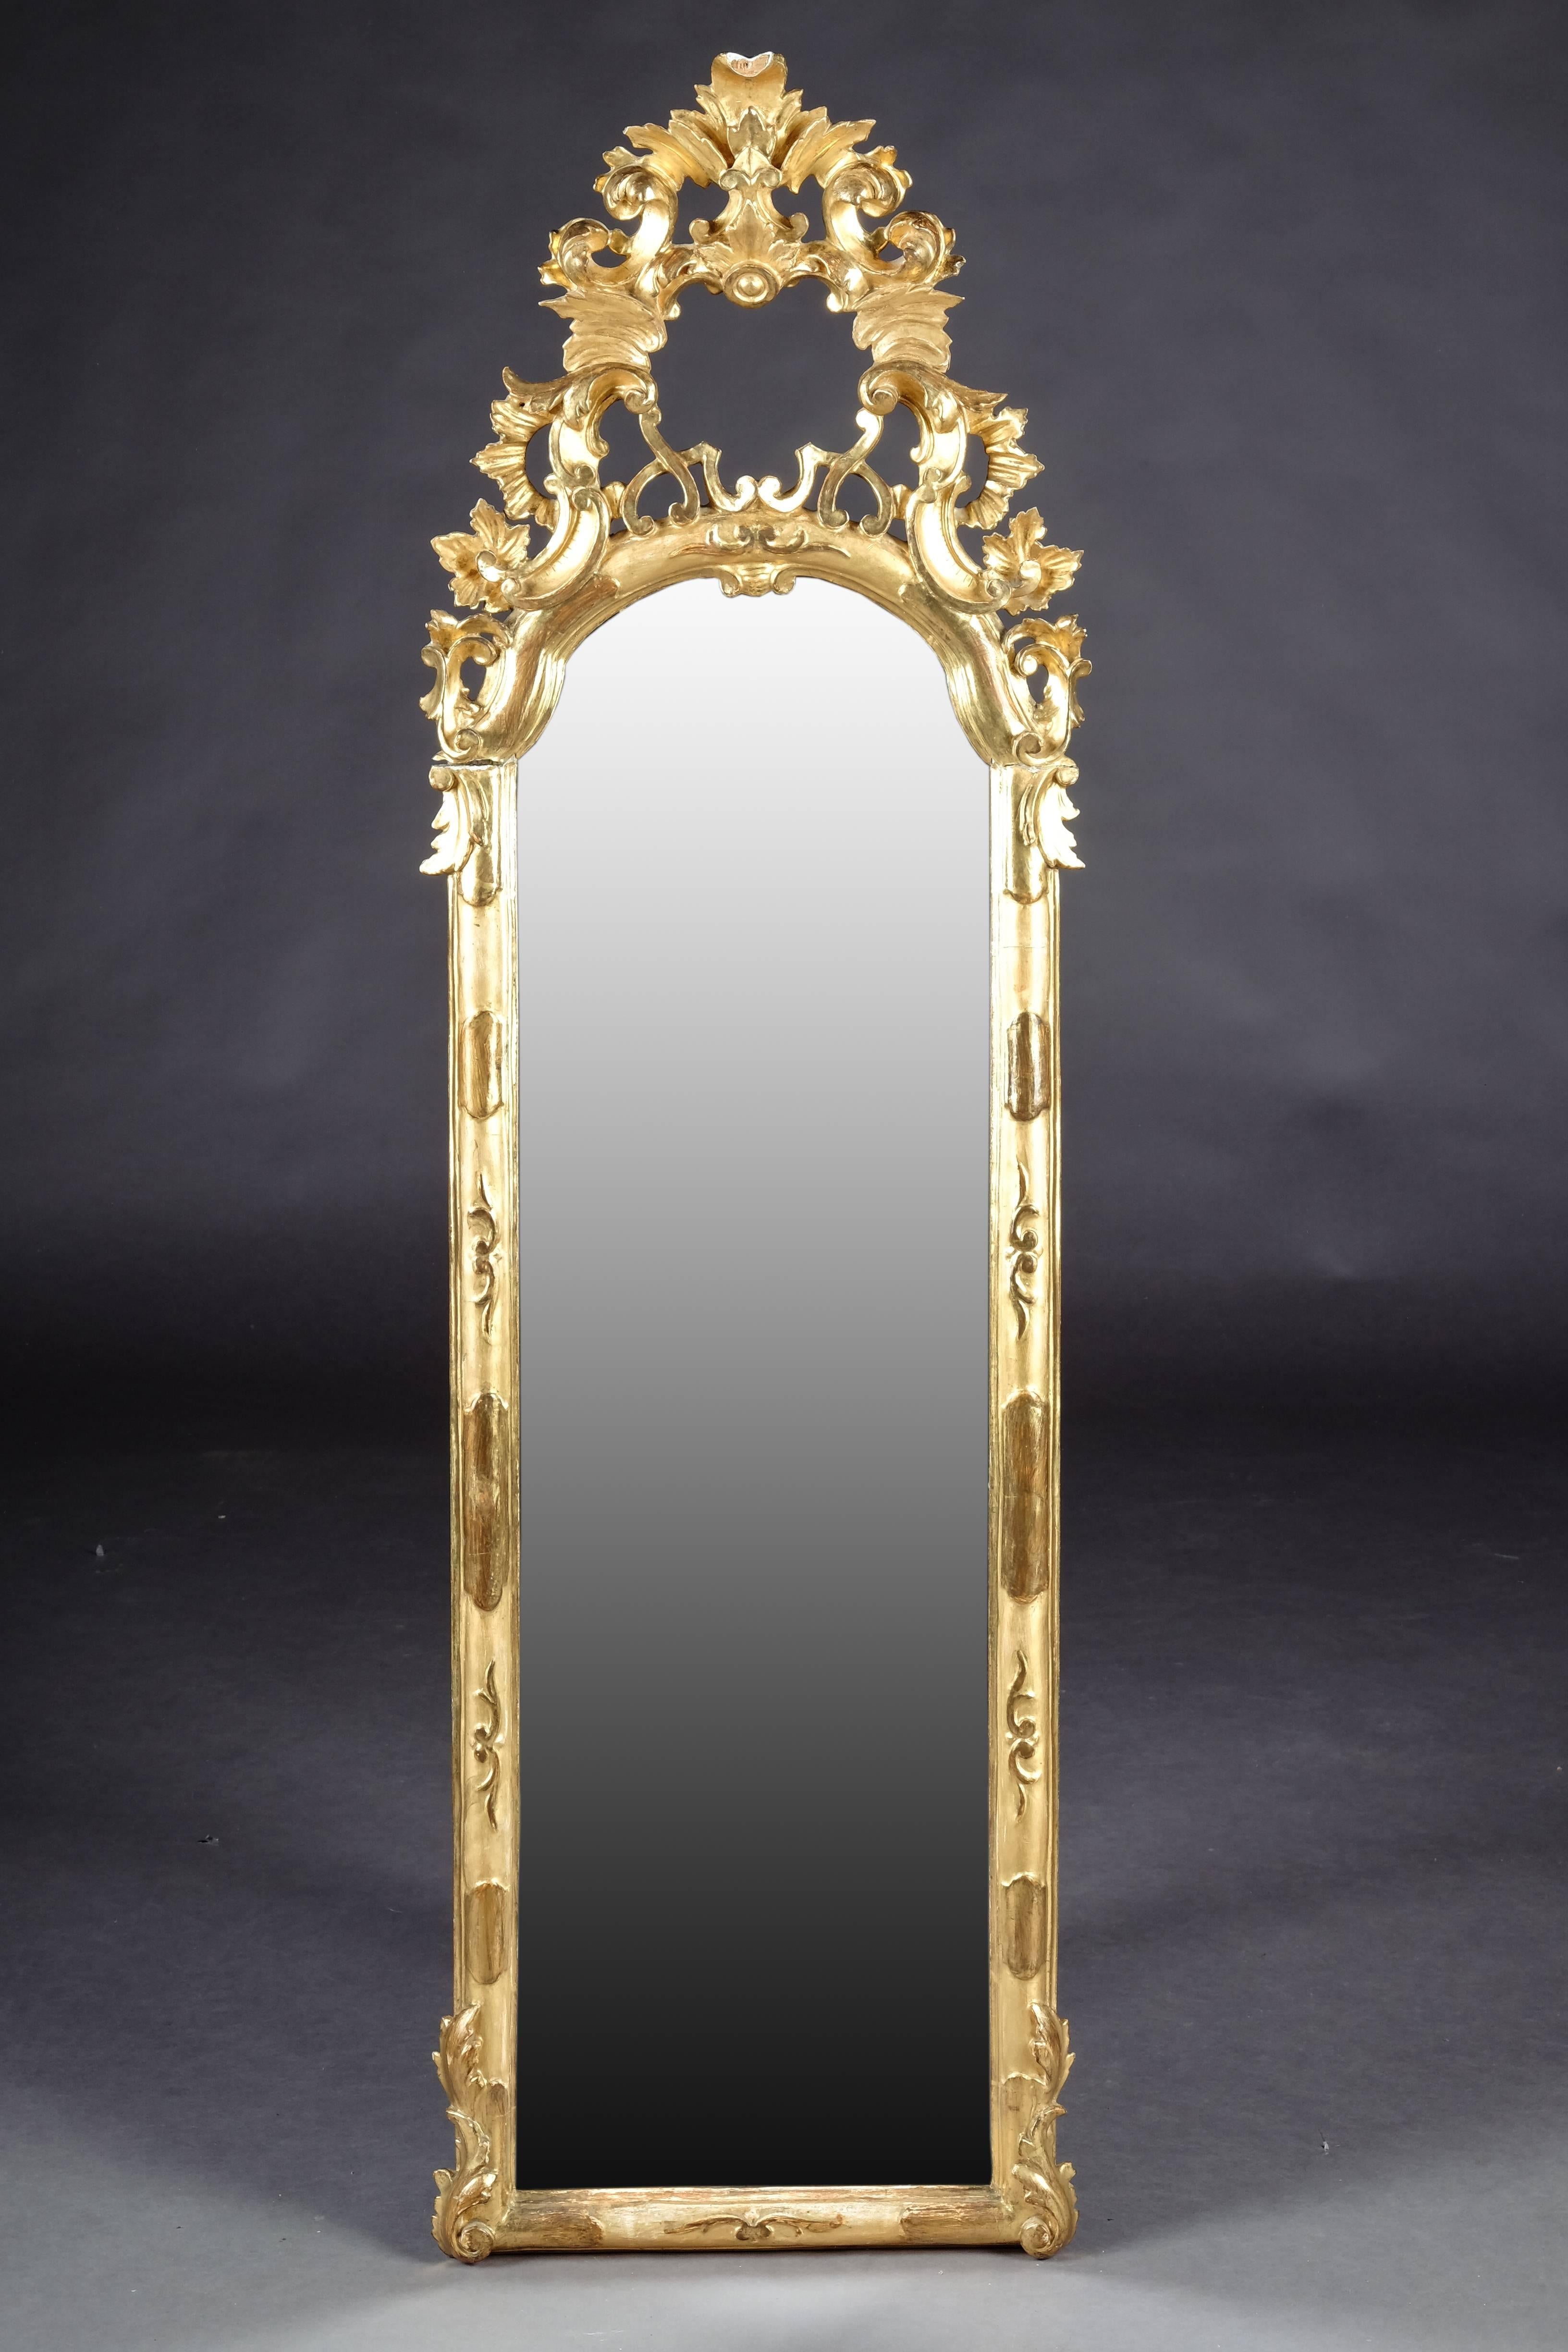 Solid wood carved and leaf gilded. High-quality mirror frame. The Giebelfeld is decorated with sculptured carved Baroque elements.

(M-18).